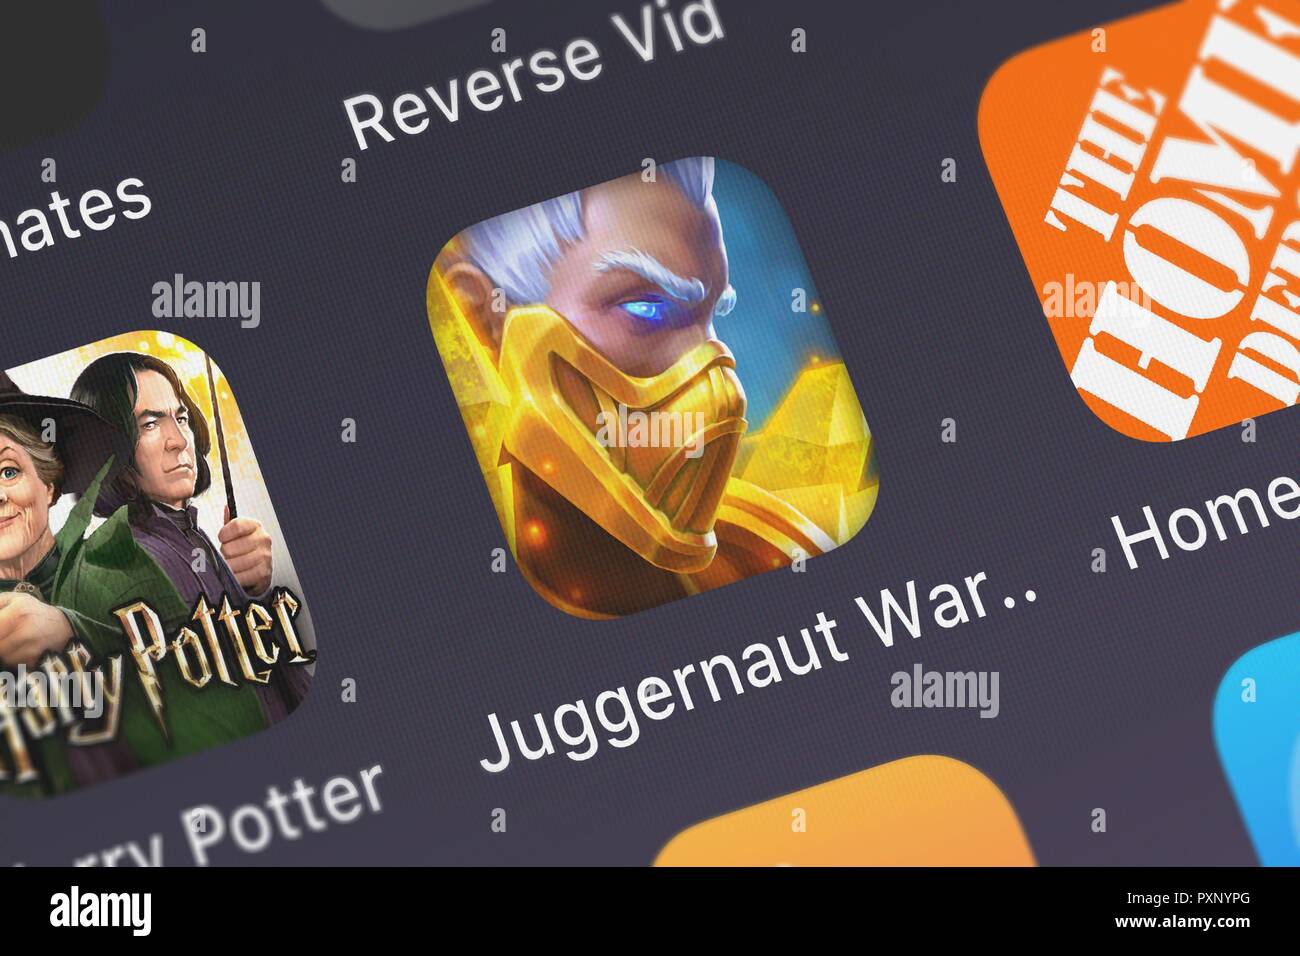 London, United Kingdom - October 23, 2018: Icon of the mobile app Juggernaut Wars – Action MOBA from MY COM on an iPhone. Stock Photo